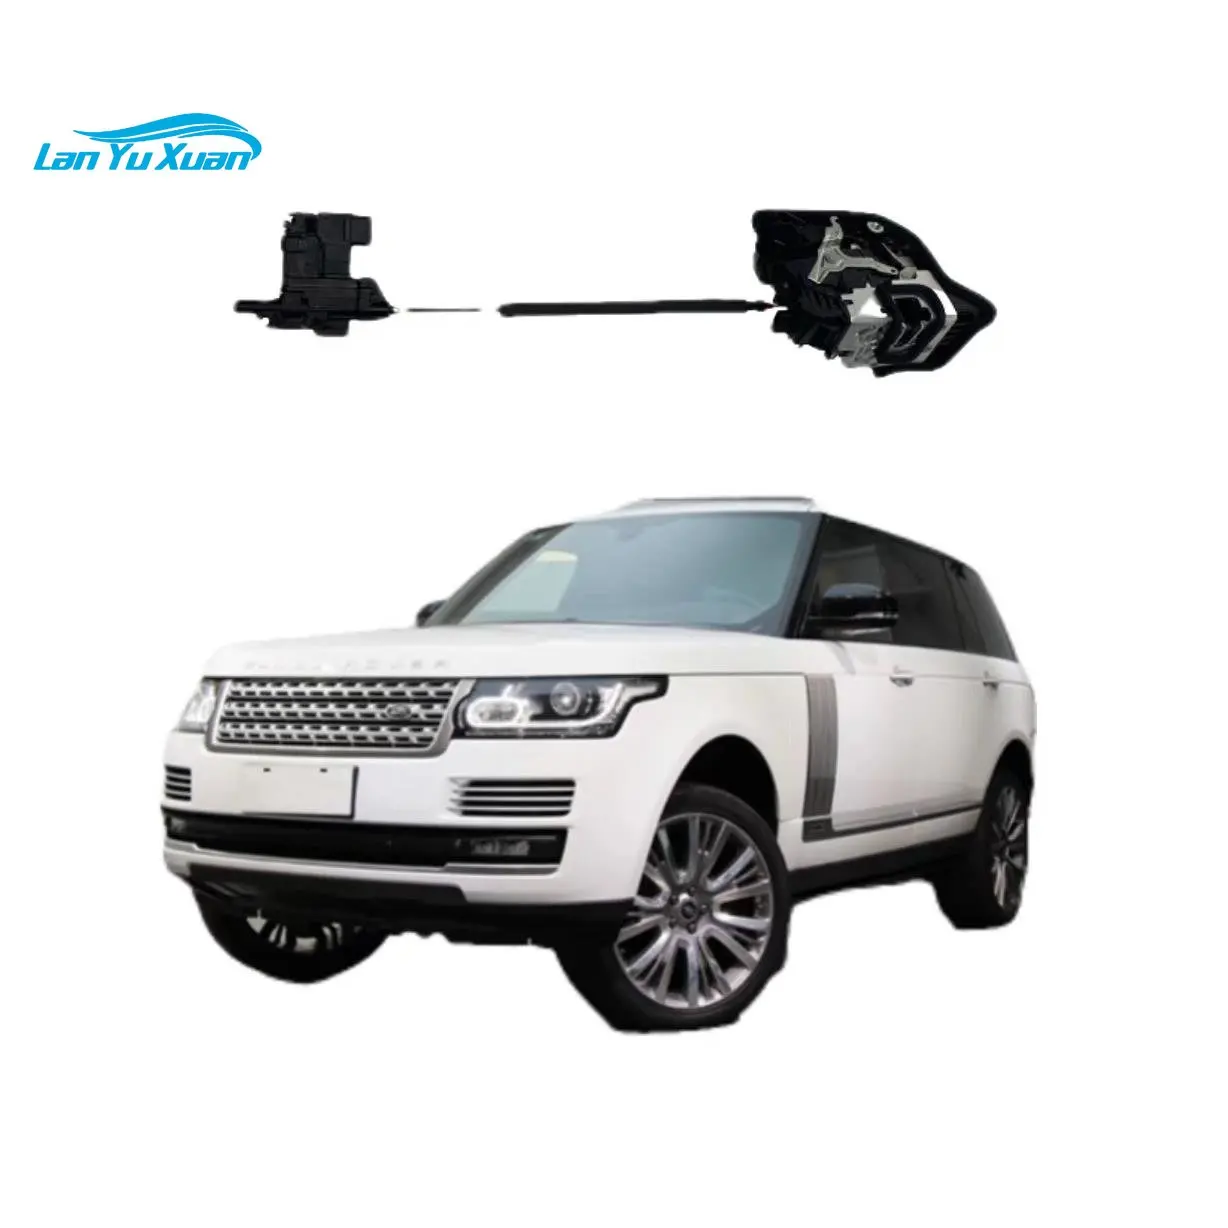 Vehicle Door Soft Power Lock System Power Liftgate Plug And Play Suction Electric For Land Rover h 265 hevc poe nvr 4k output 8ch security video recorder onvif rtsp linux face detect xmeye cctv security system plug and play